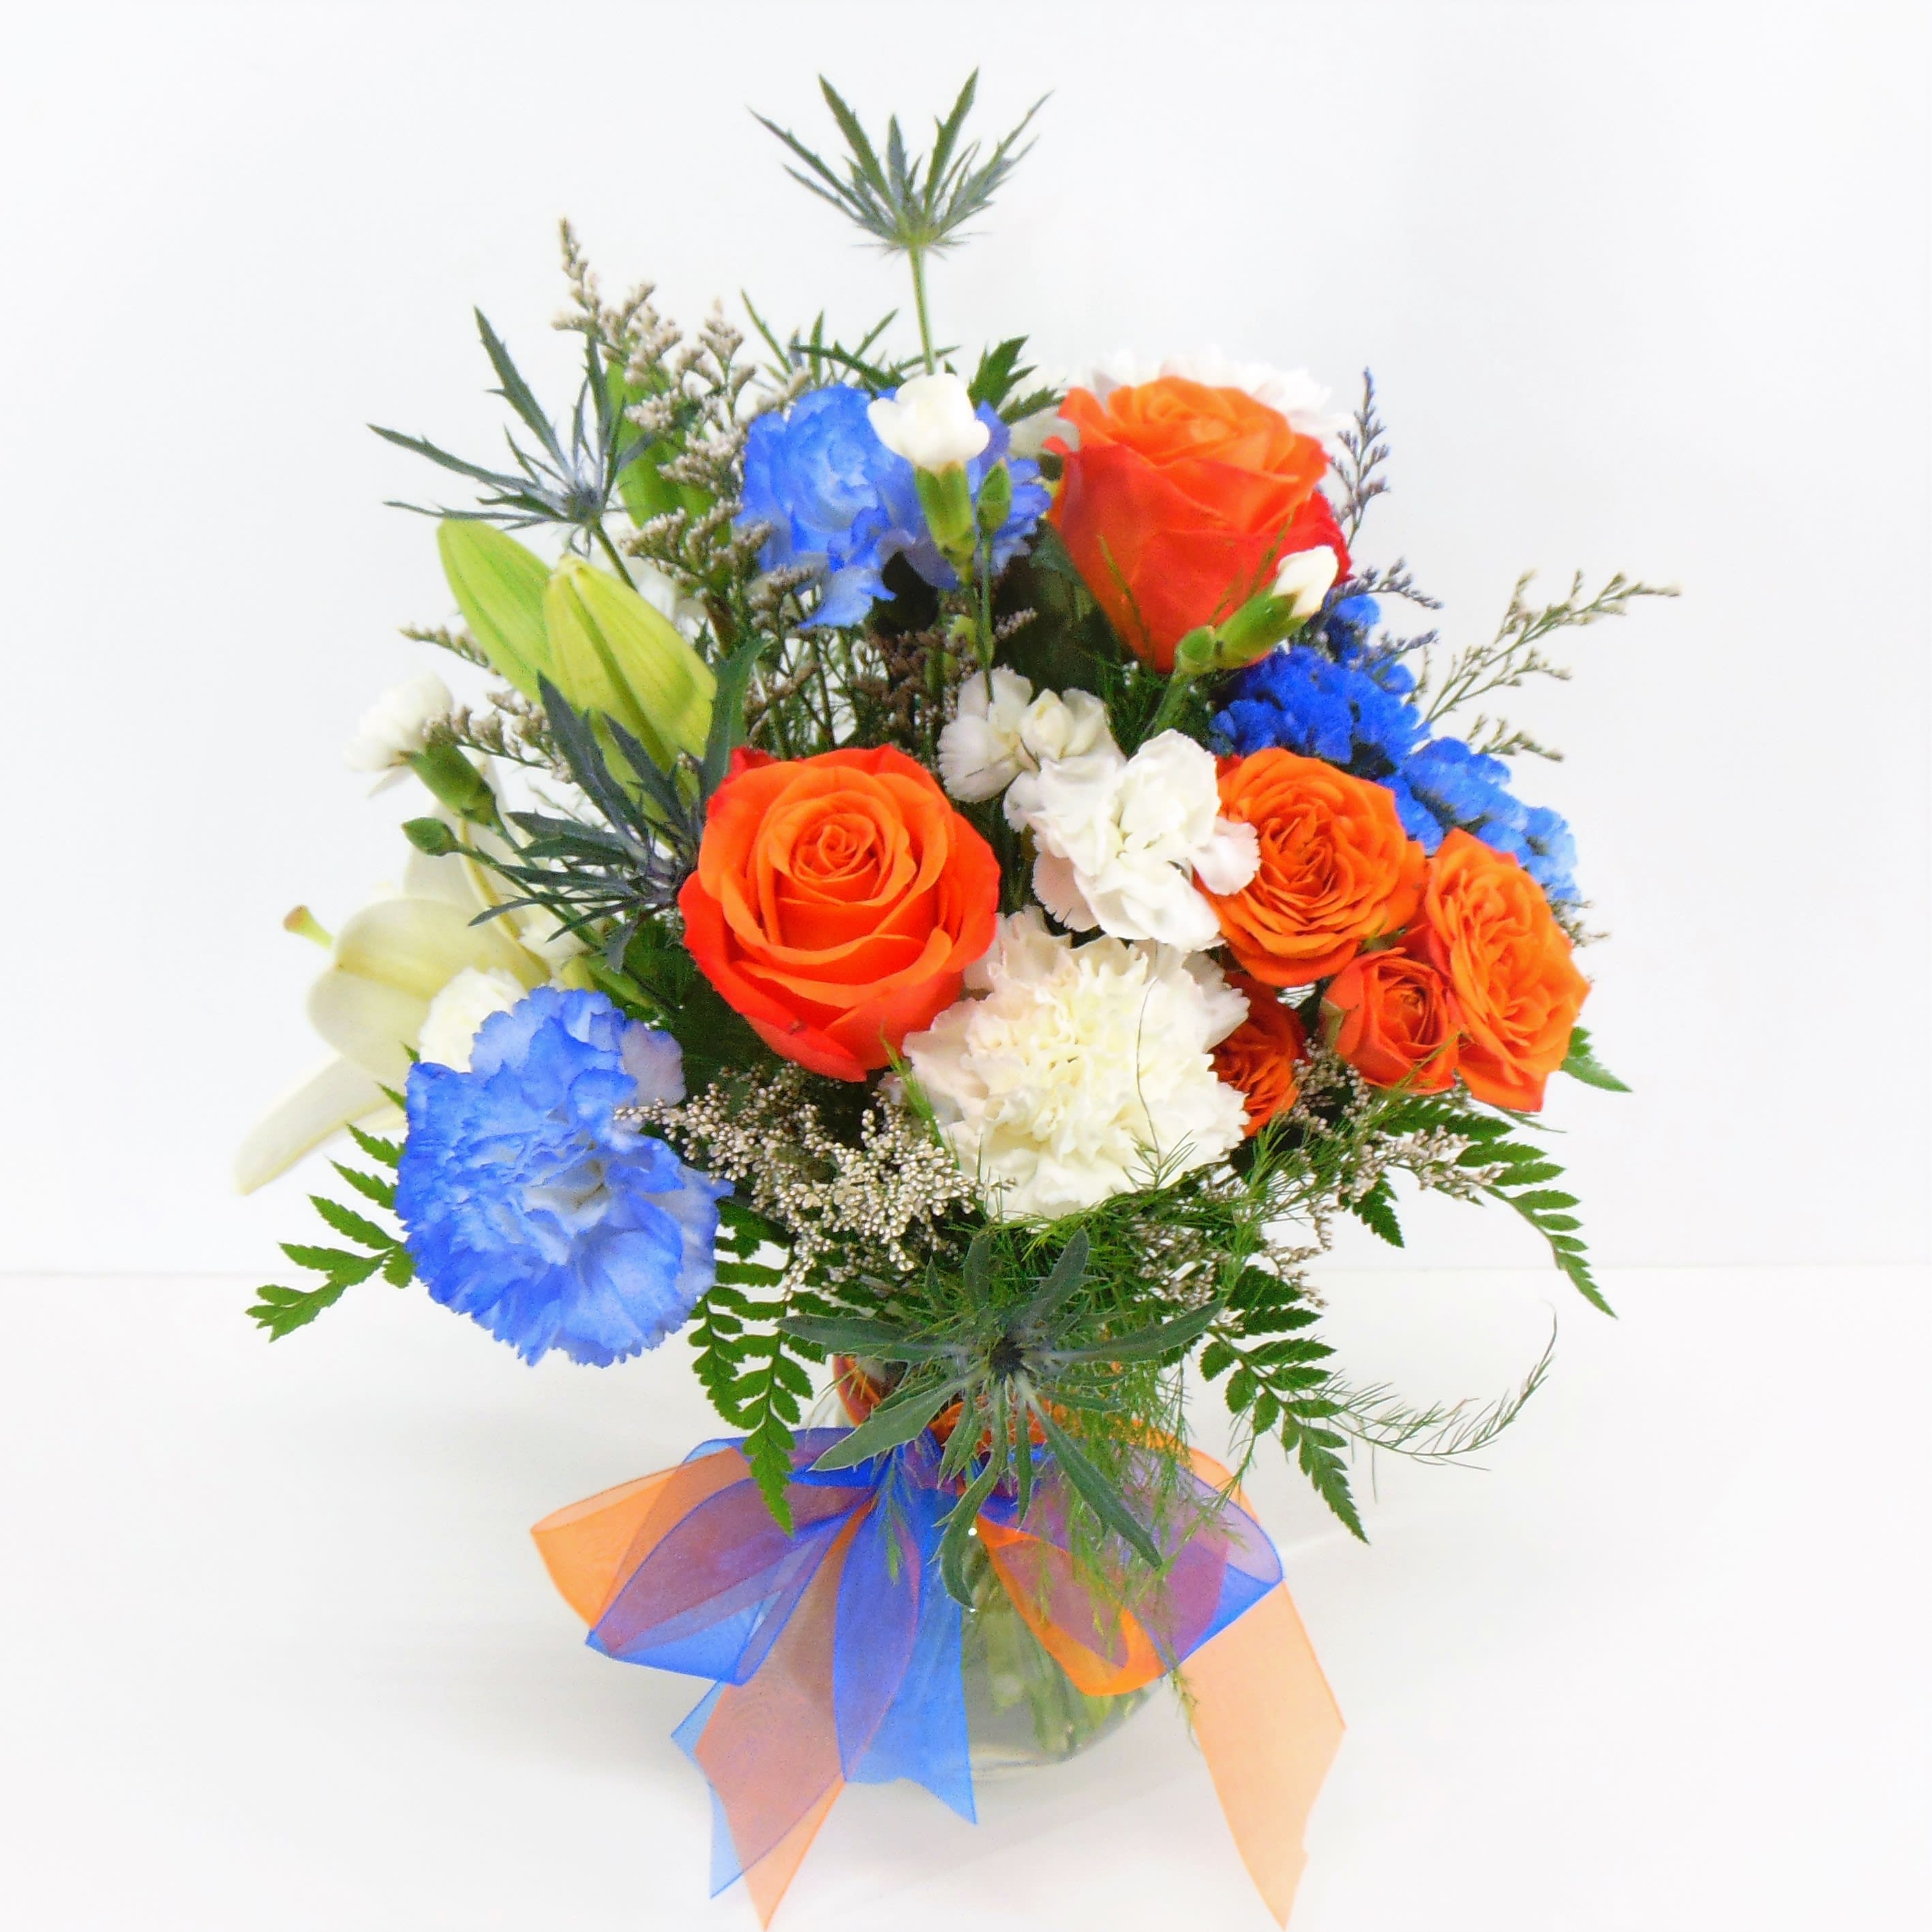 Bulldog Spirit in Orange &amp; Blue - Send celebration wishes with this colorful bouquet of school spirit and blooms of lilies, carnations, blue thistle and roses. Designed one-sided in a glass vase and the deluxe option is pictured.